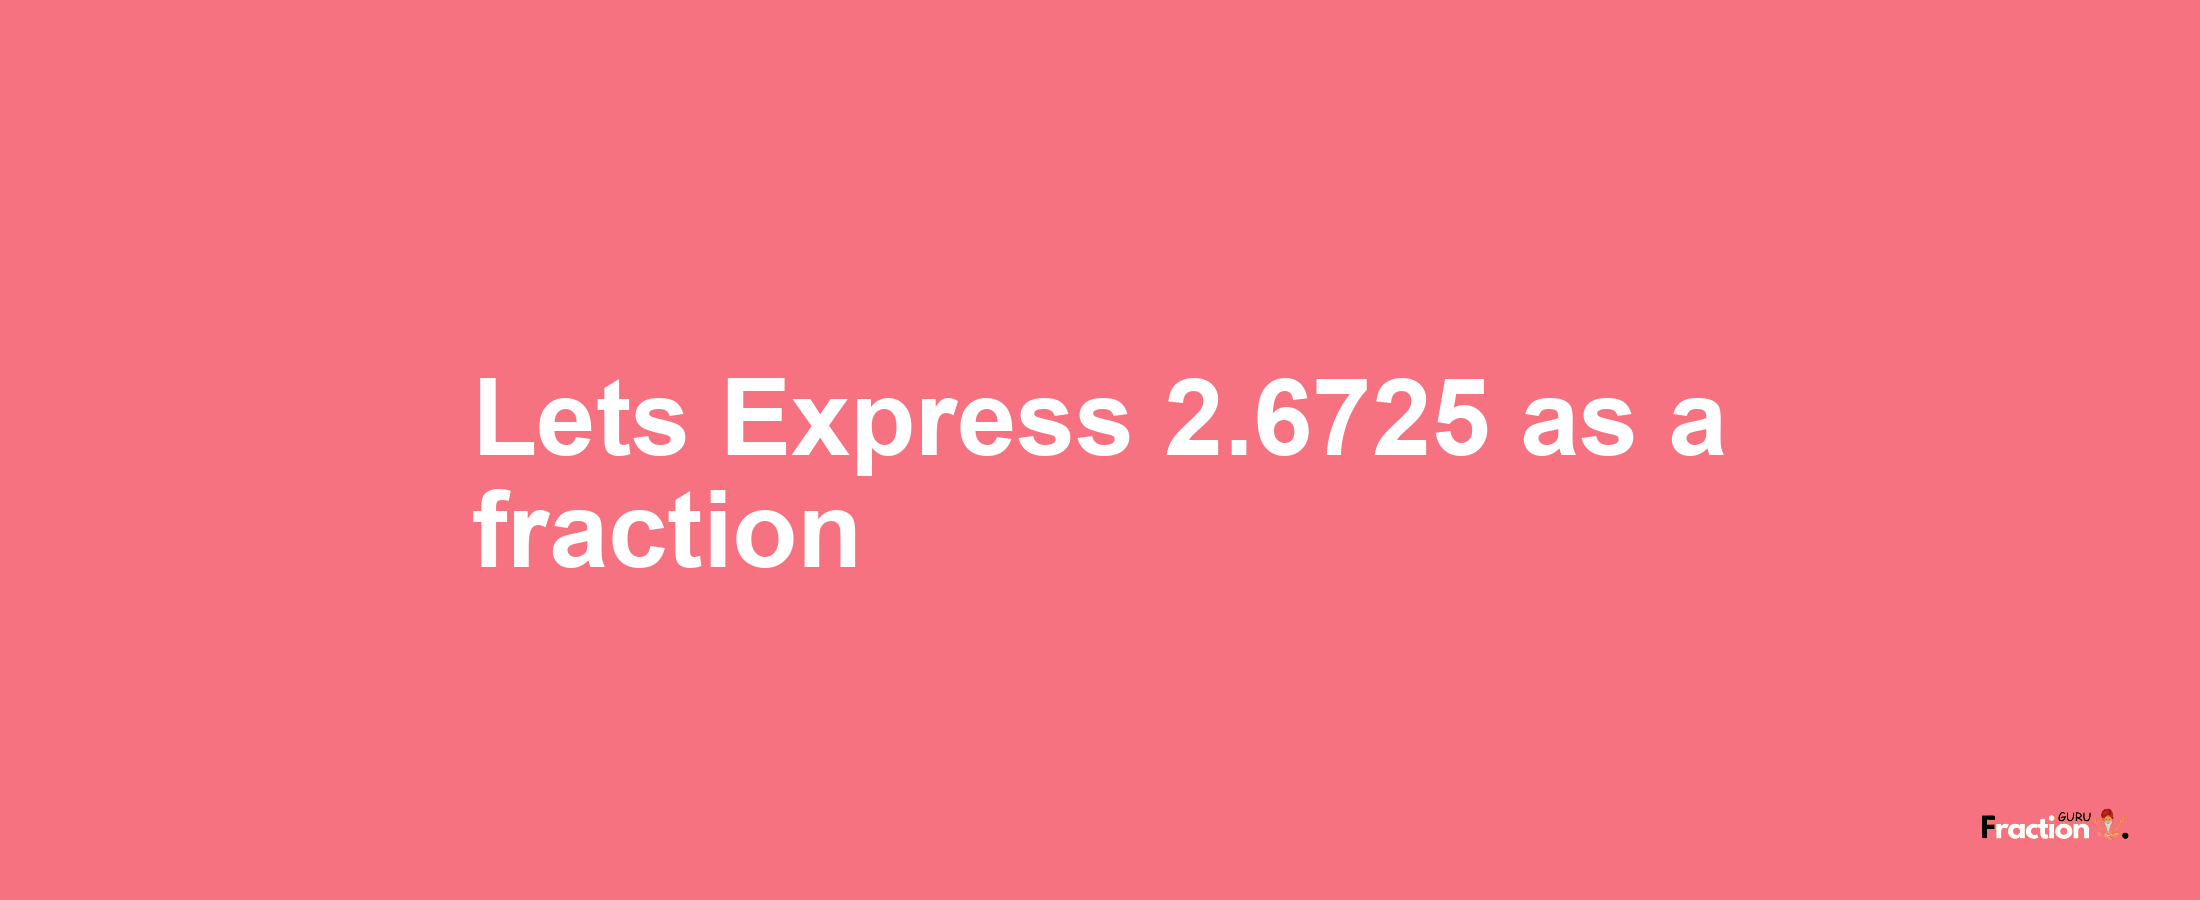 Lets Express 2.6725 as afraction